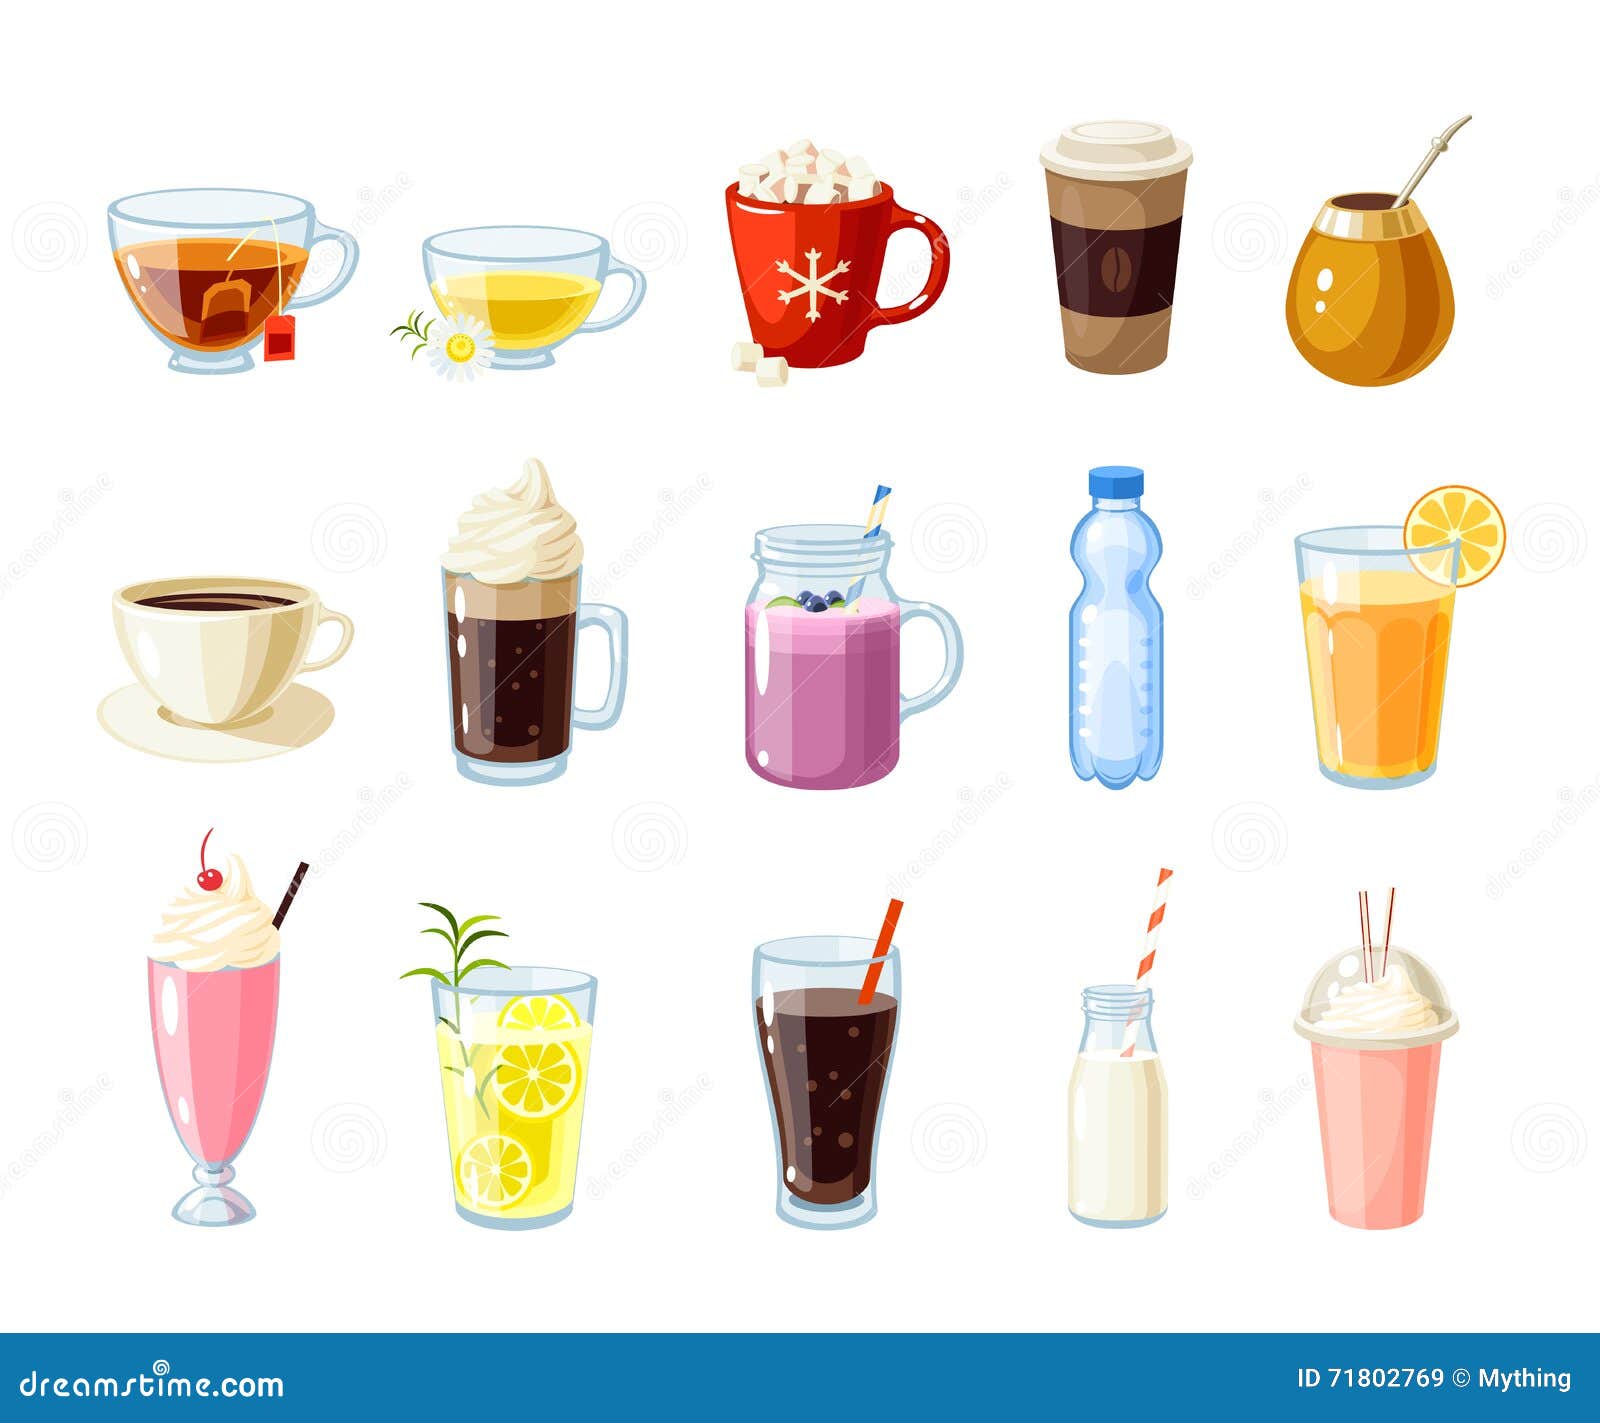 set of cartoon food: non-alcoholic beverages